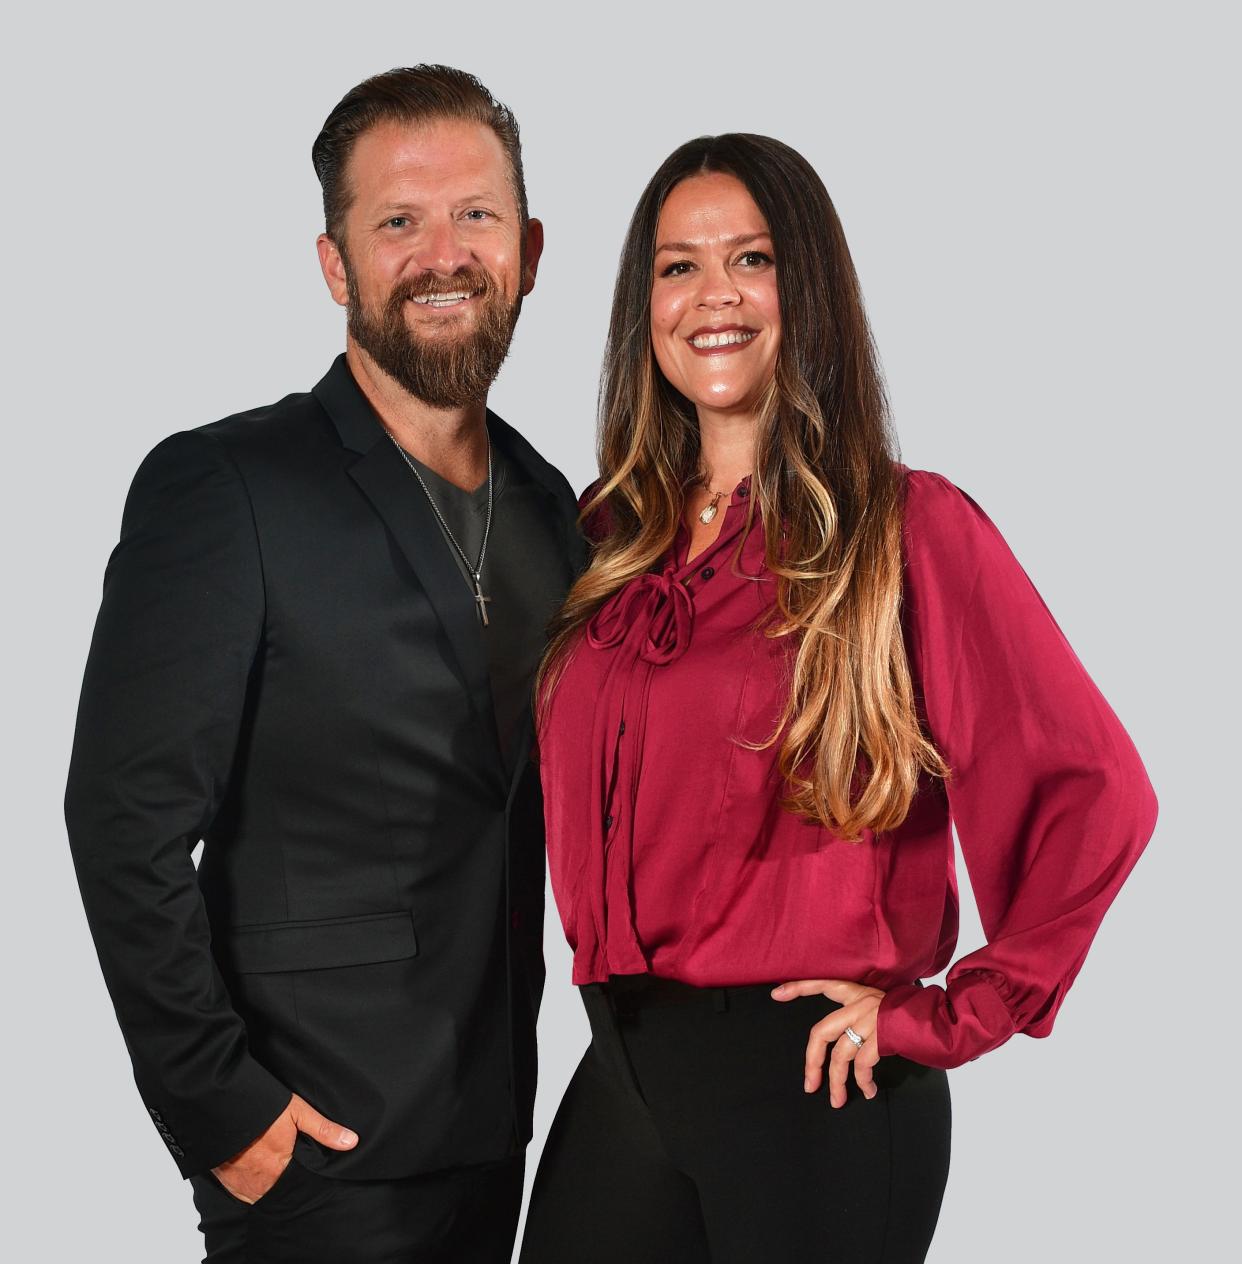 Justin and Lanay Berry created Caritas Realty to blend their devotion to their clients with their desire to help local charities.